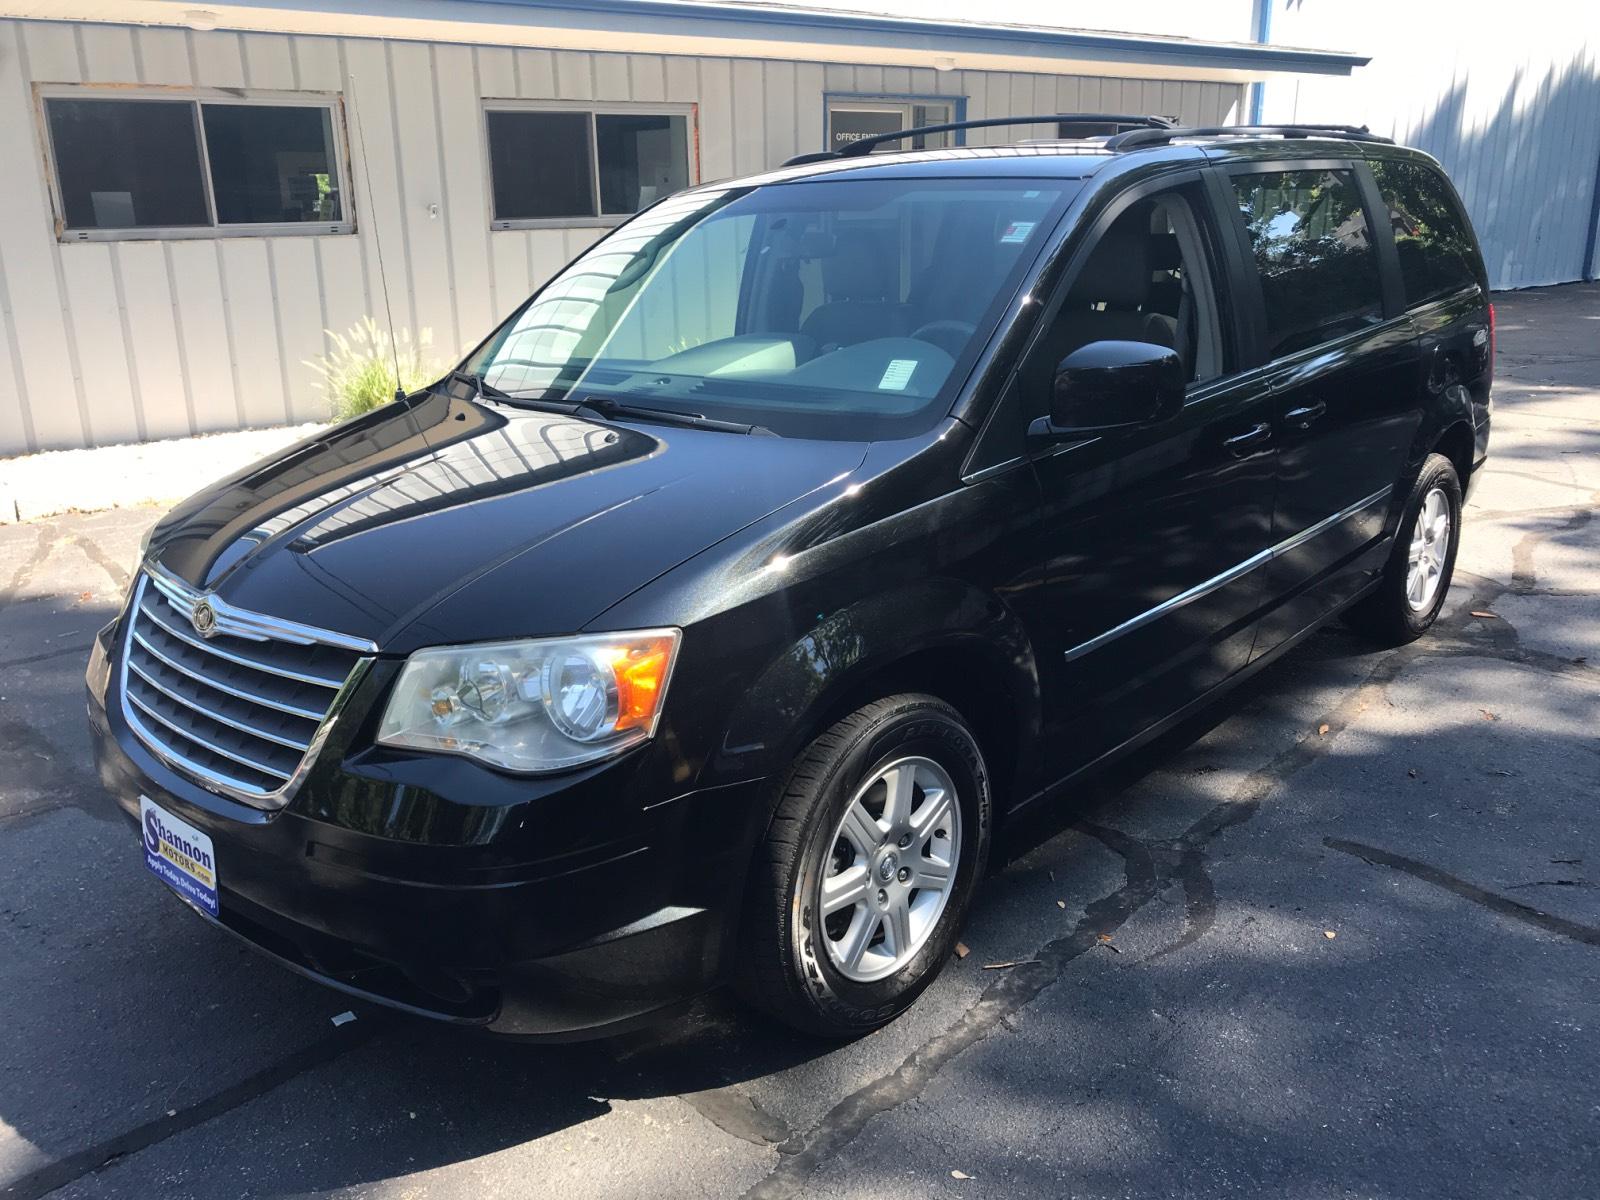 Used 2010 Chrysler Town & Country 4dr Wgn Touring Minivan